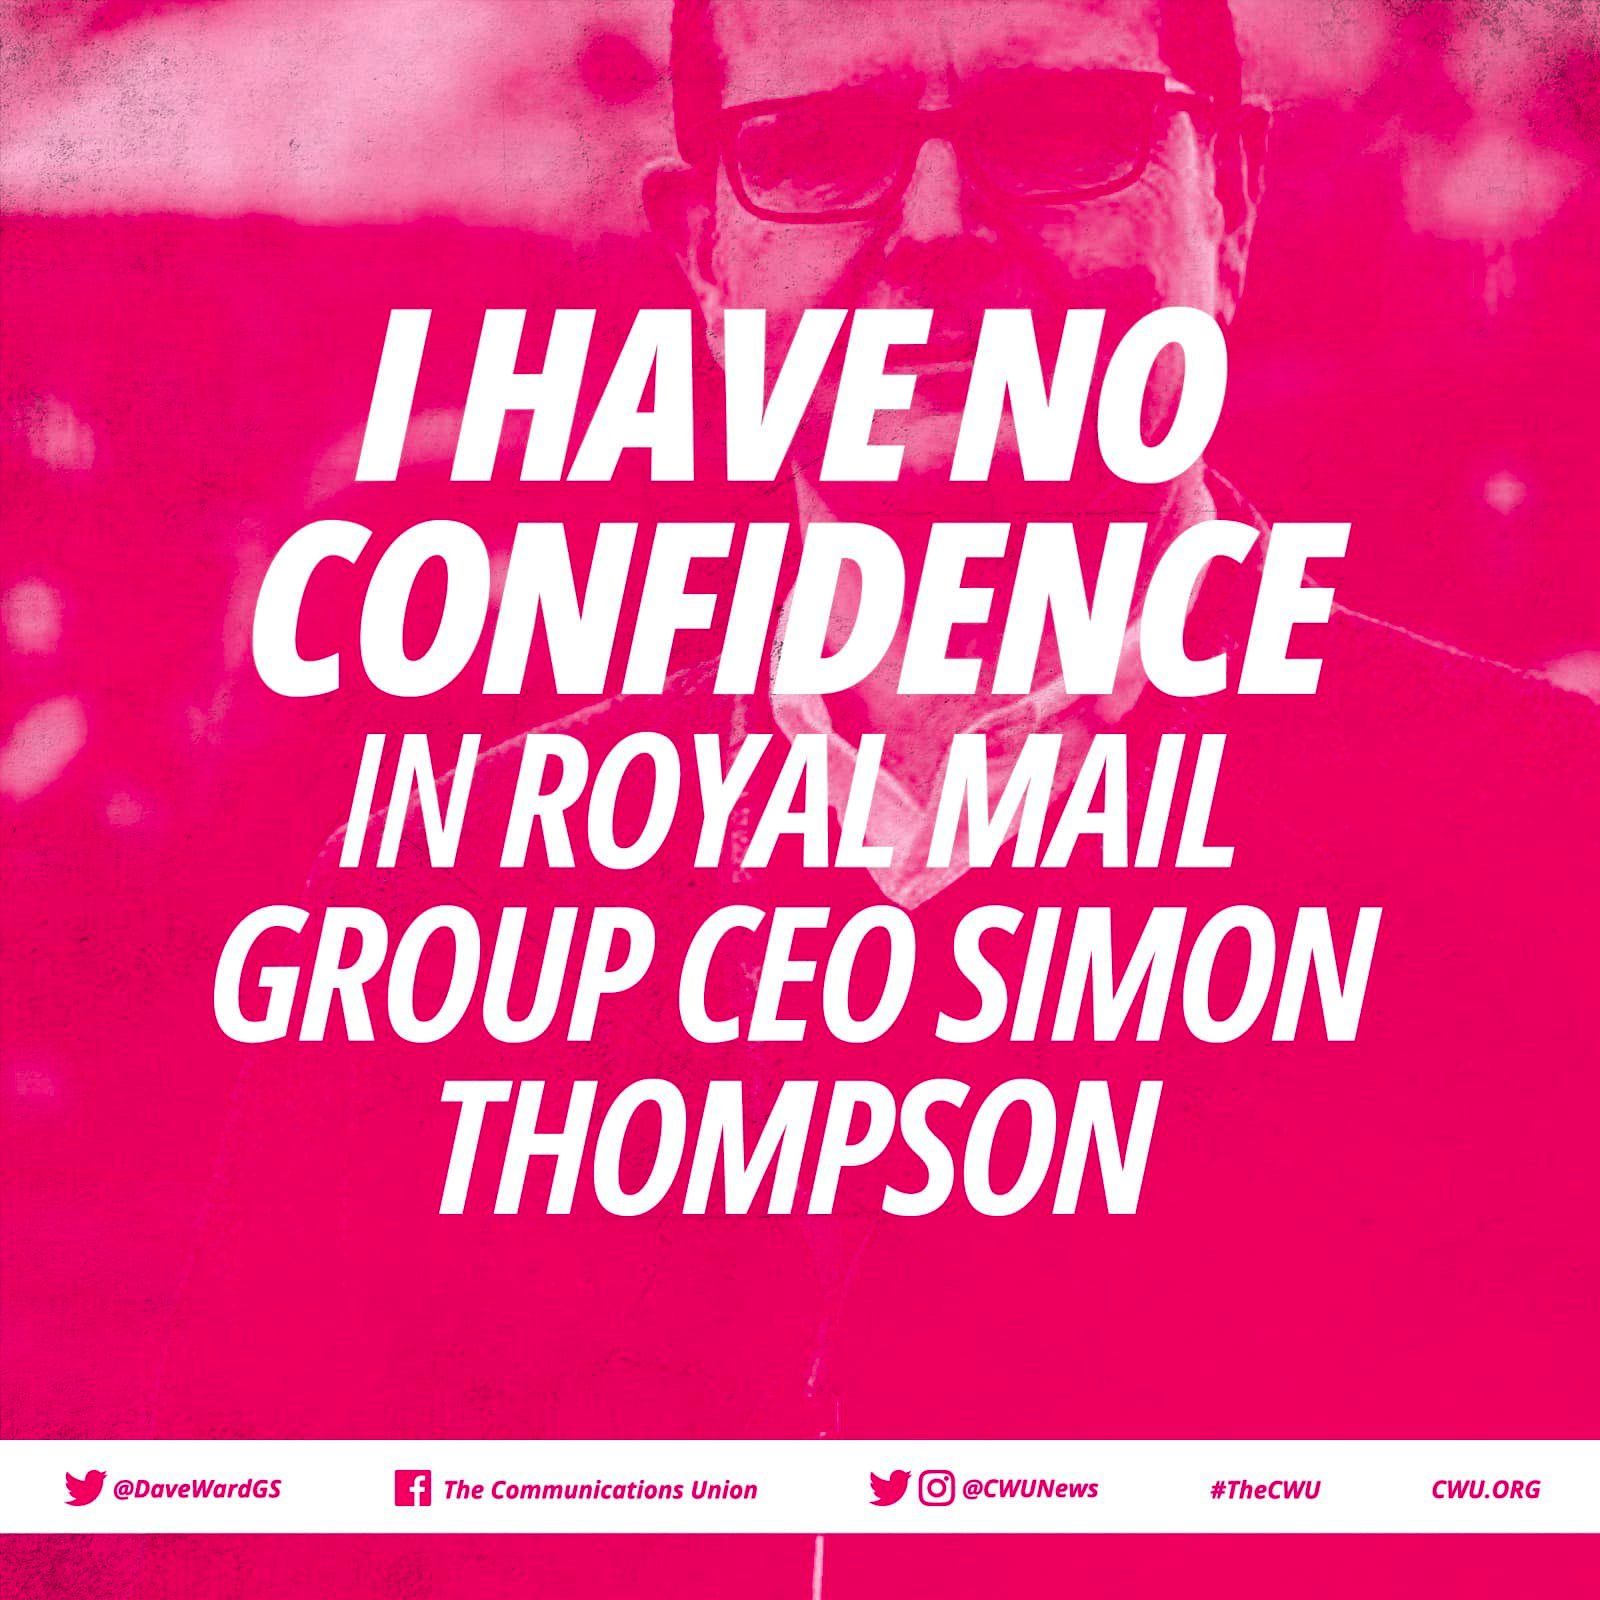 cwu-no-confidence-in-royal-mail-ceo-simon-thompson-twitter-image.jpeg